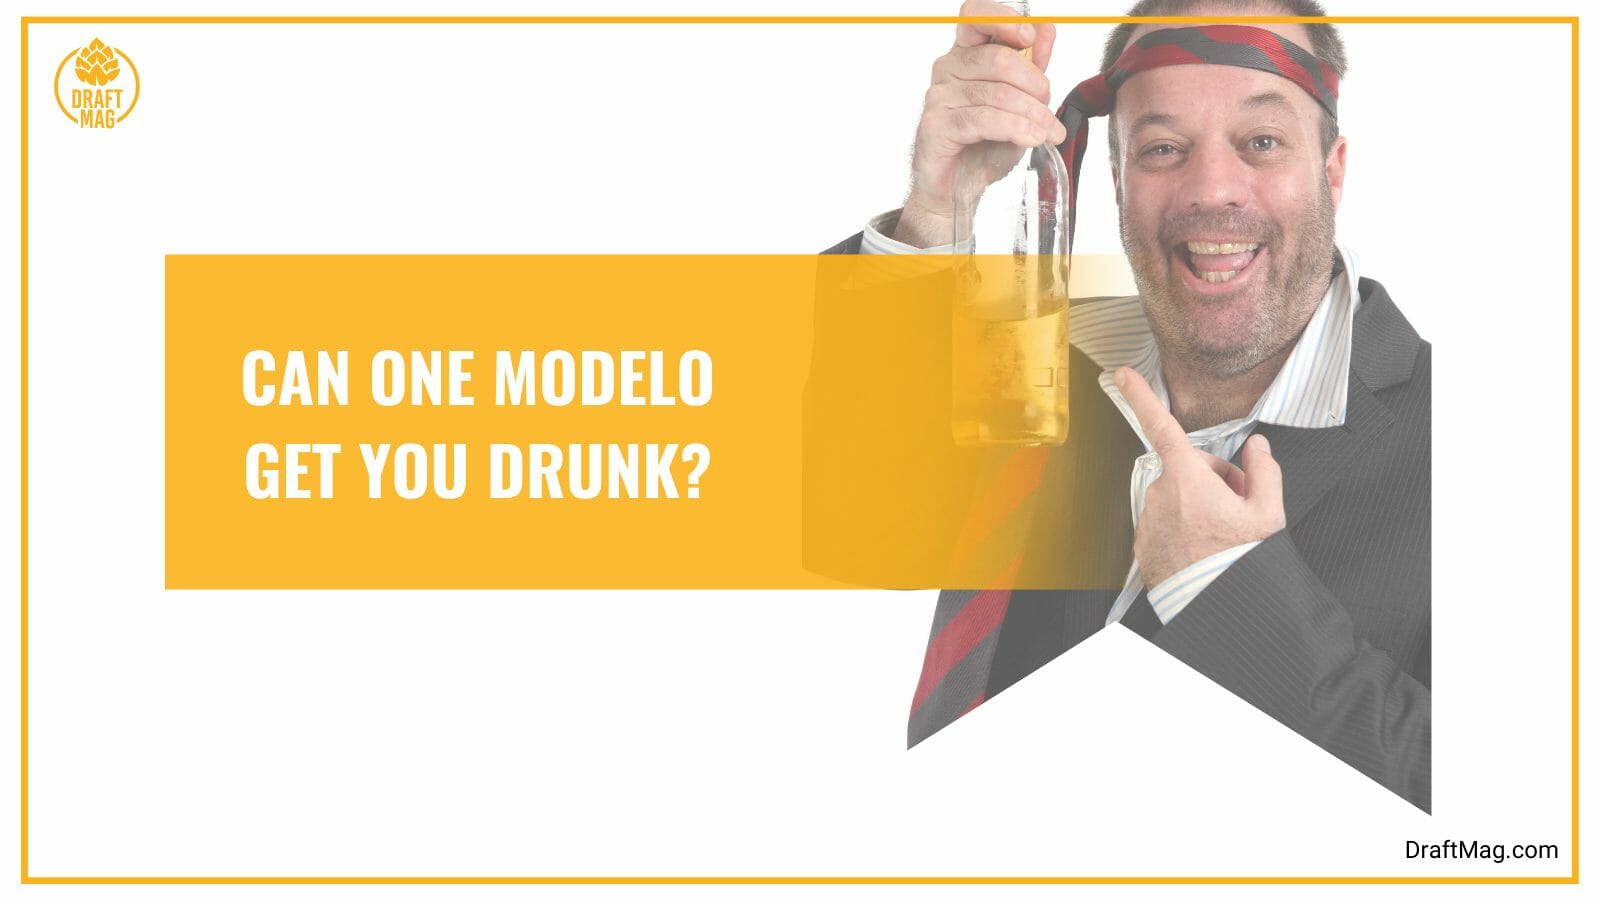 One modelo get you drunk